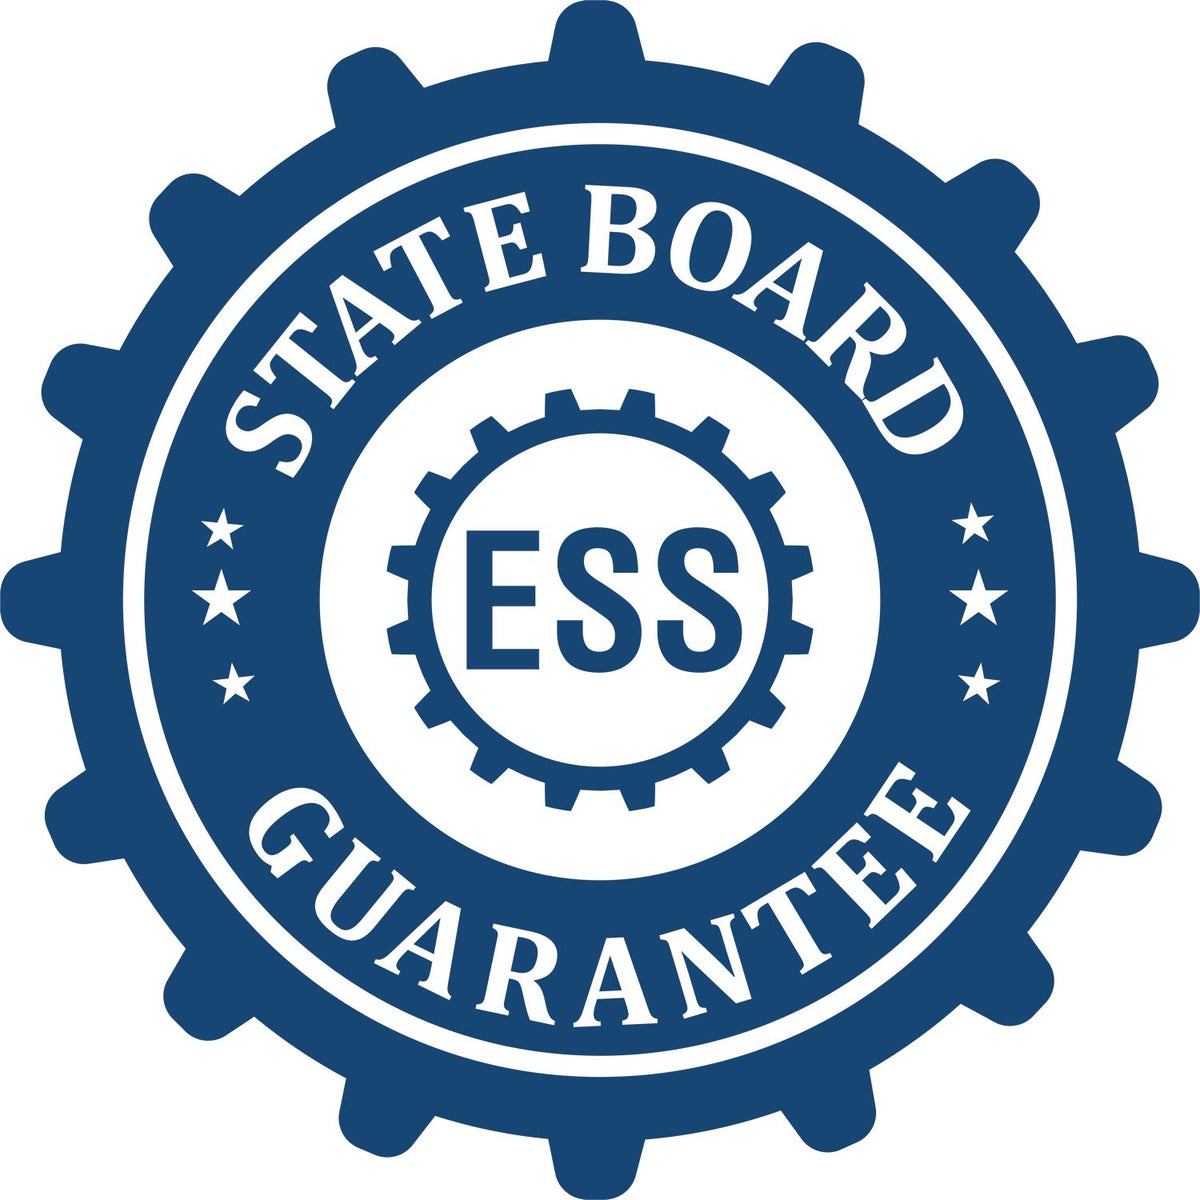 An emblem in a gear shape illustrating a state board guarantee for the Heavy Duty Cast Iron Tennessee Architect Embosser product.